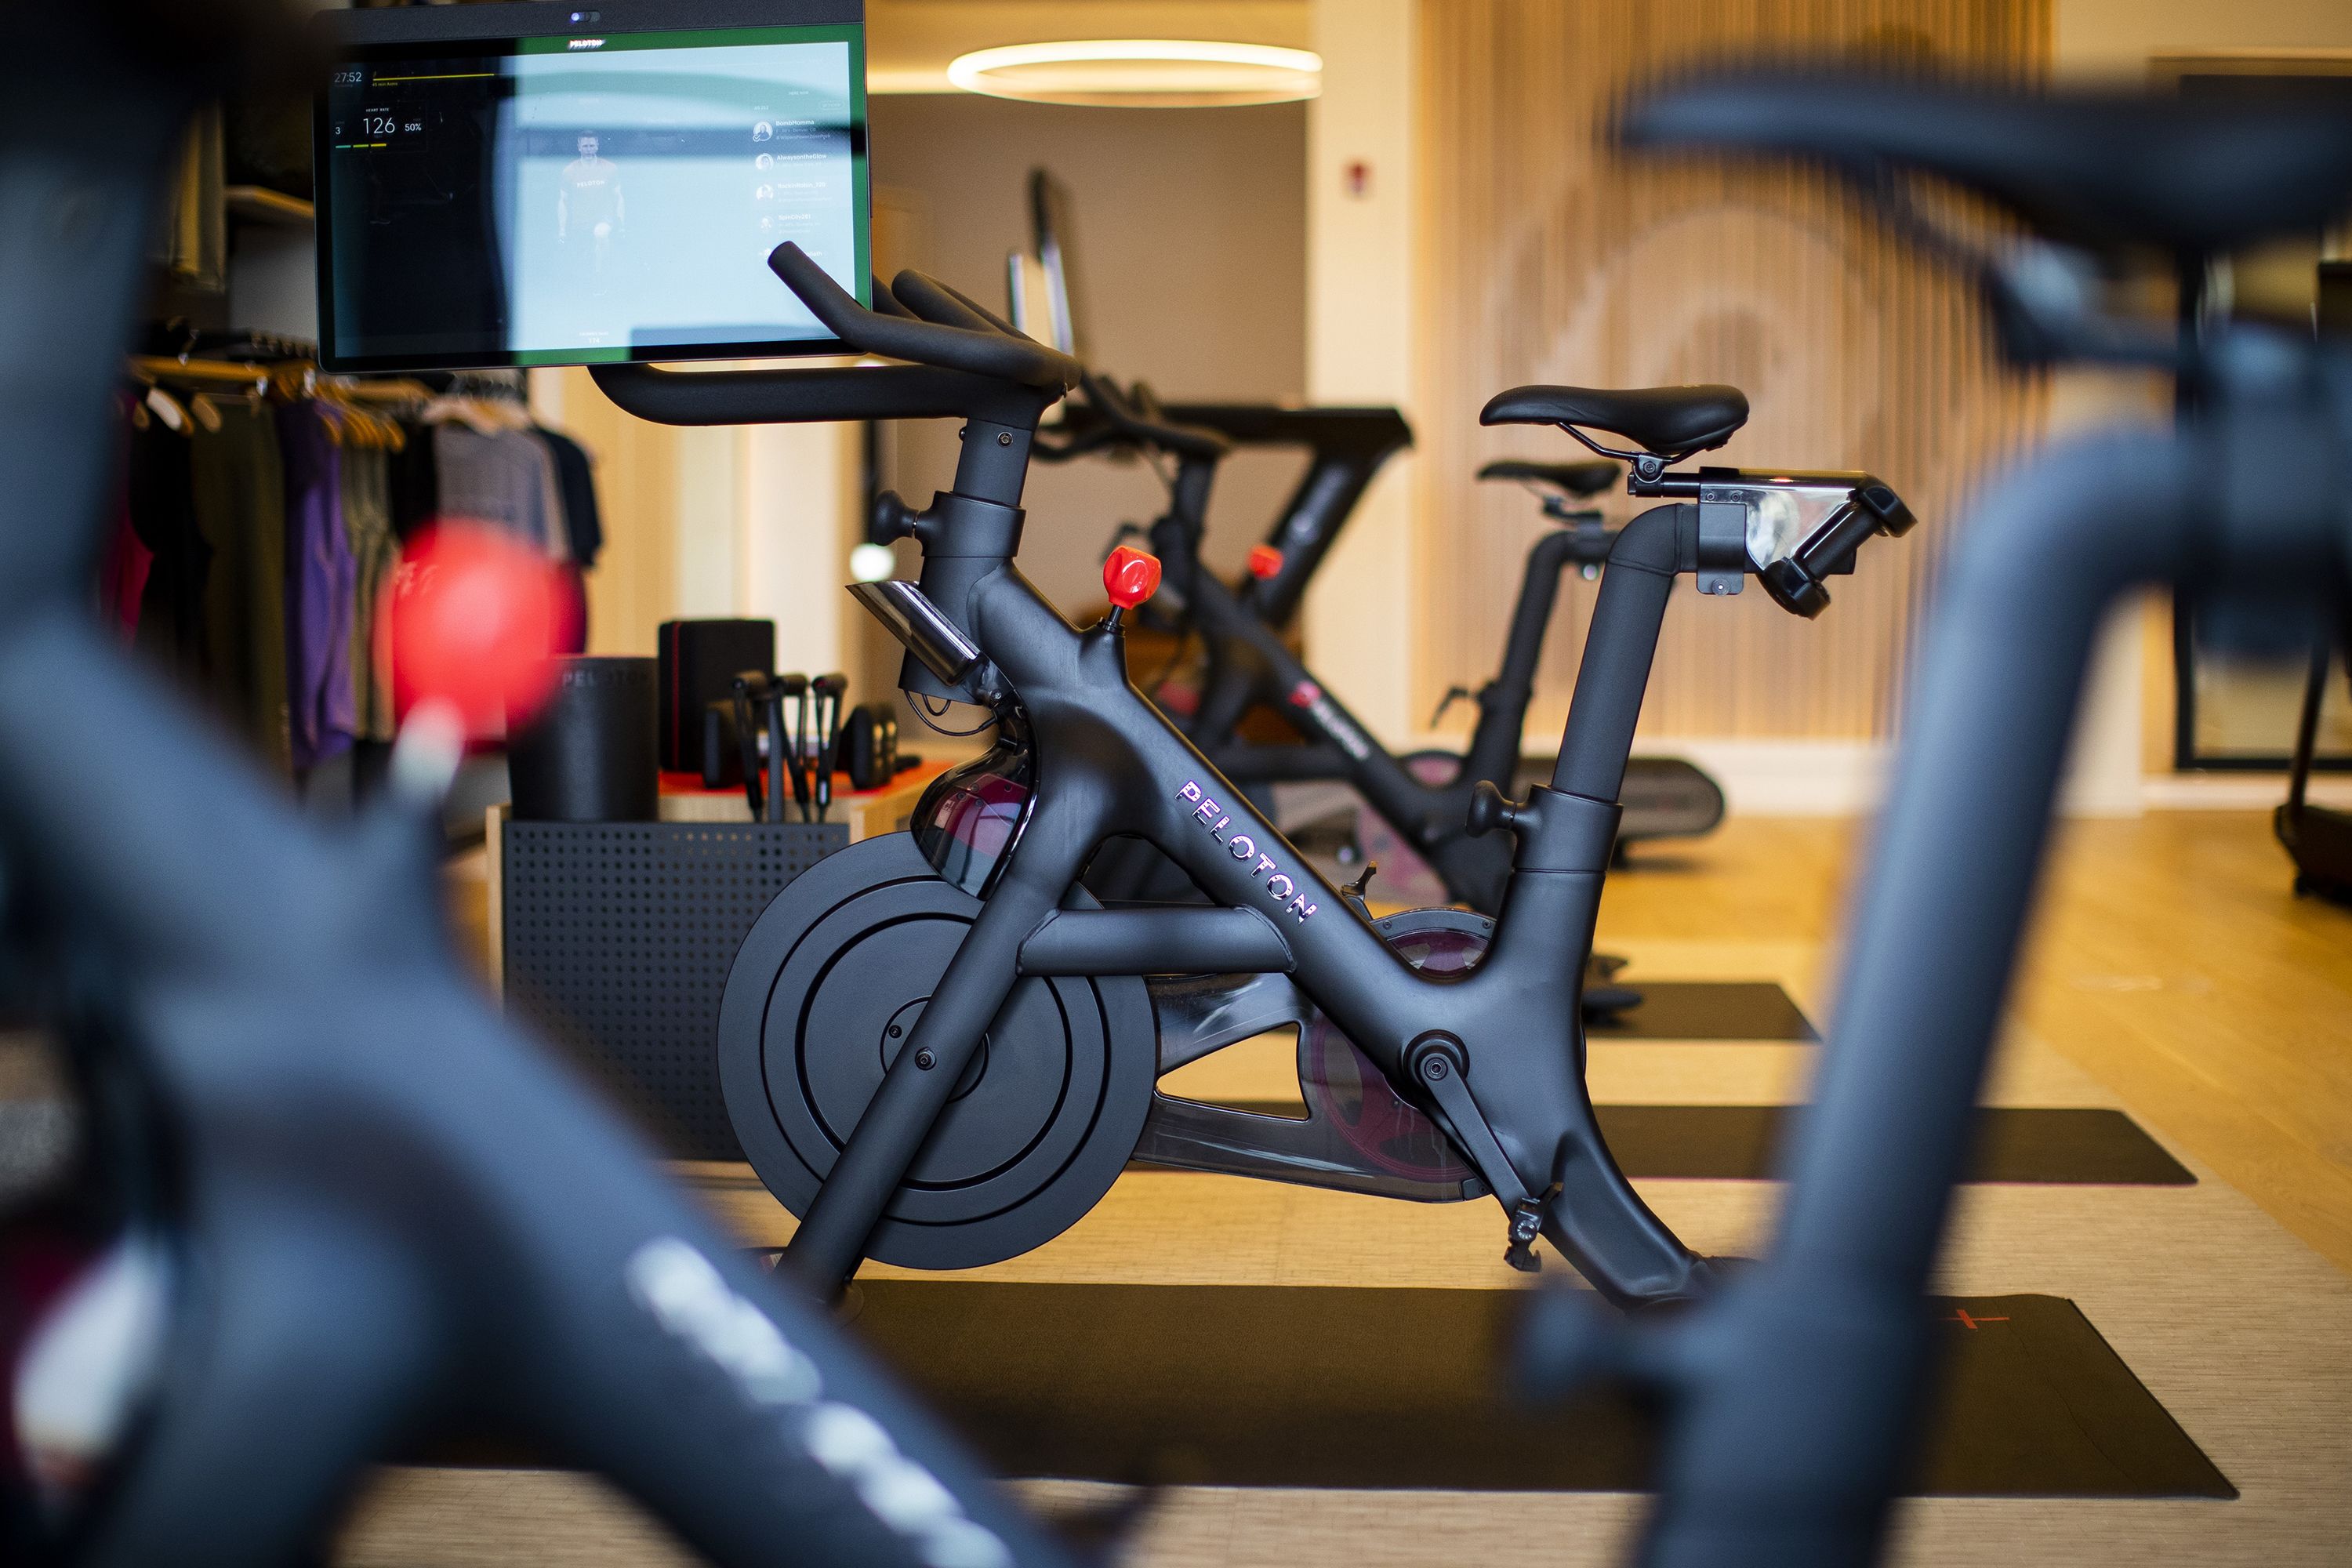 Peloton shares rise following a partnership with former foe